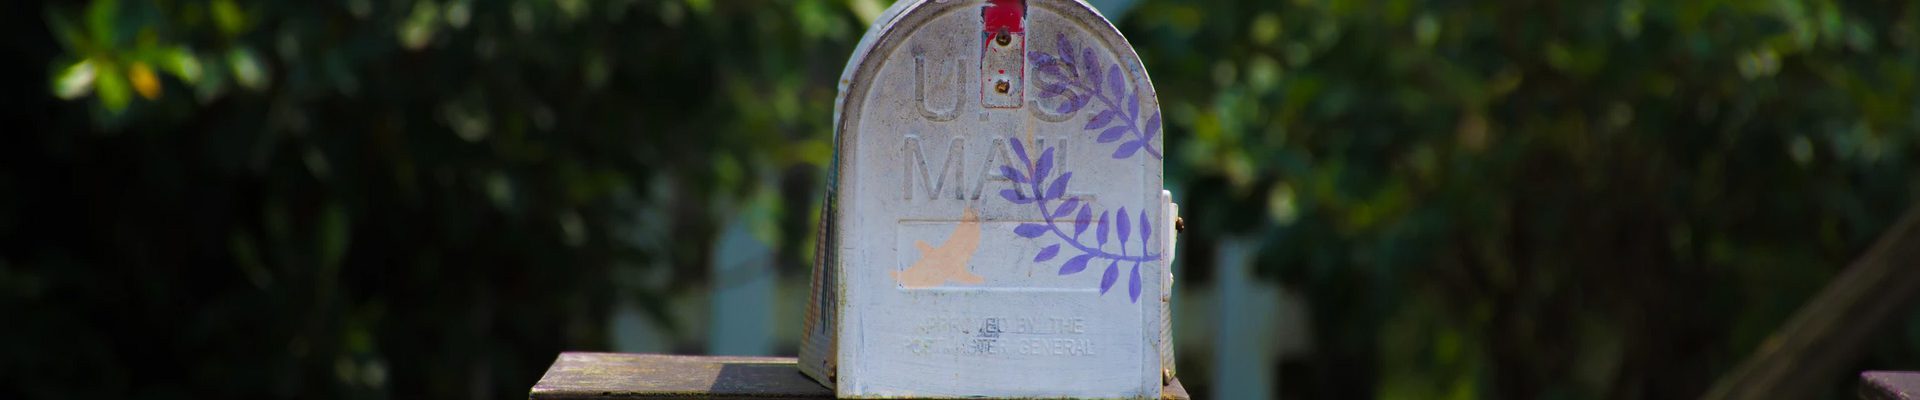 Direct mail is one of the most effective and profitable ways to reach out to new and existing clients